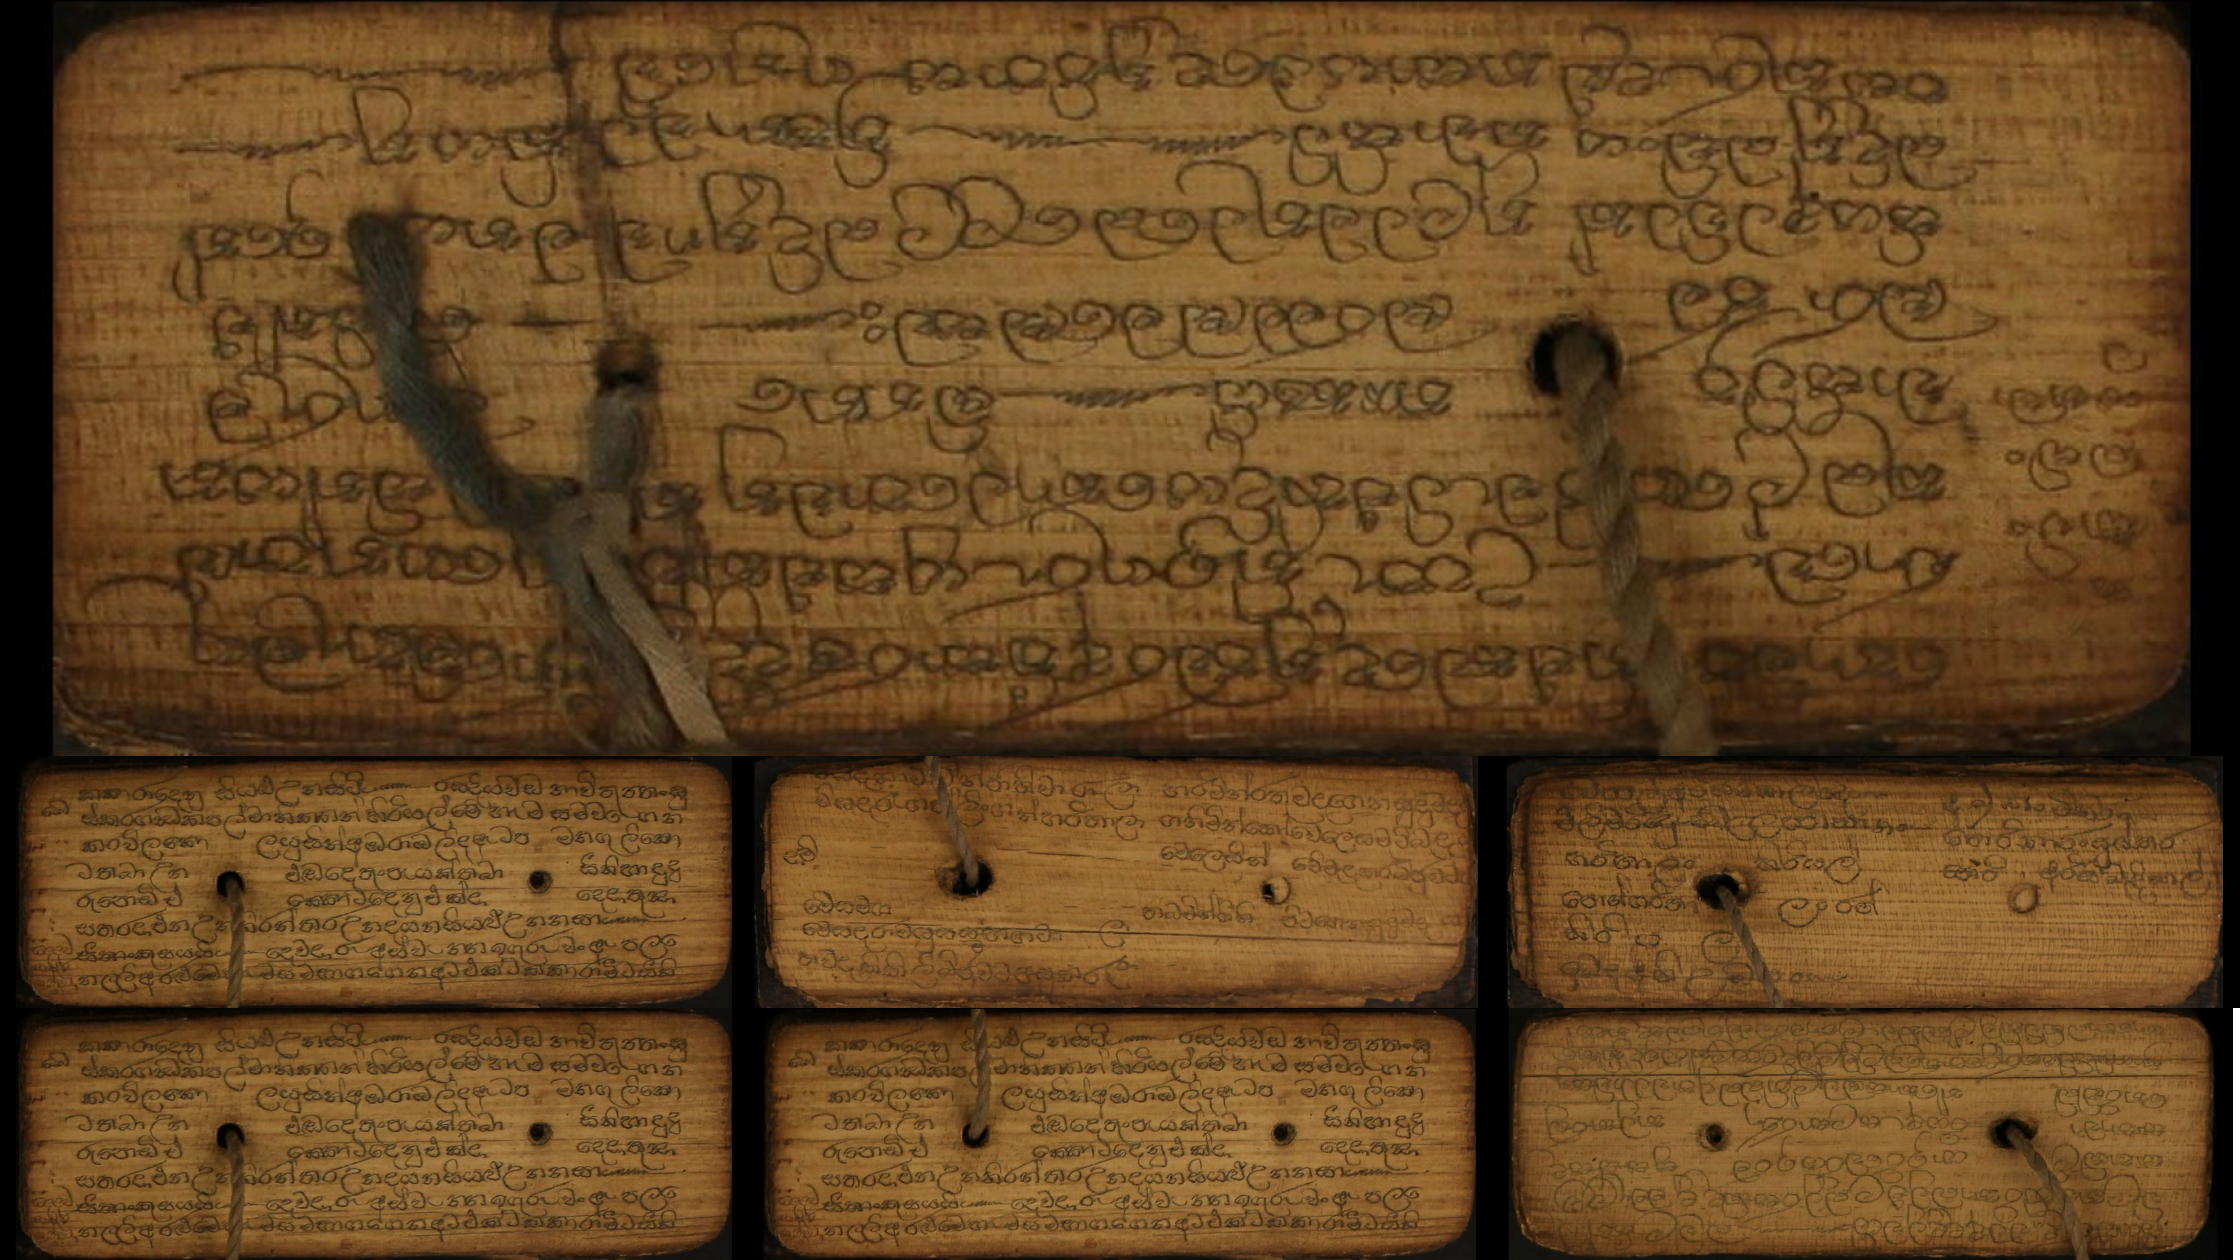 Several pages from the 19th century Sri Lankan doctor’s manual.